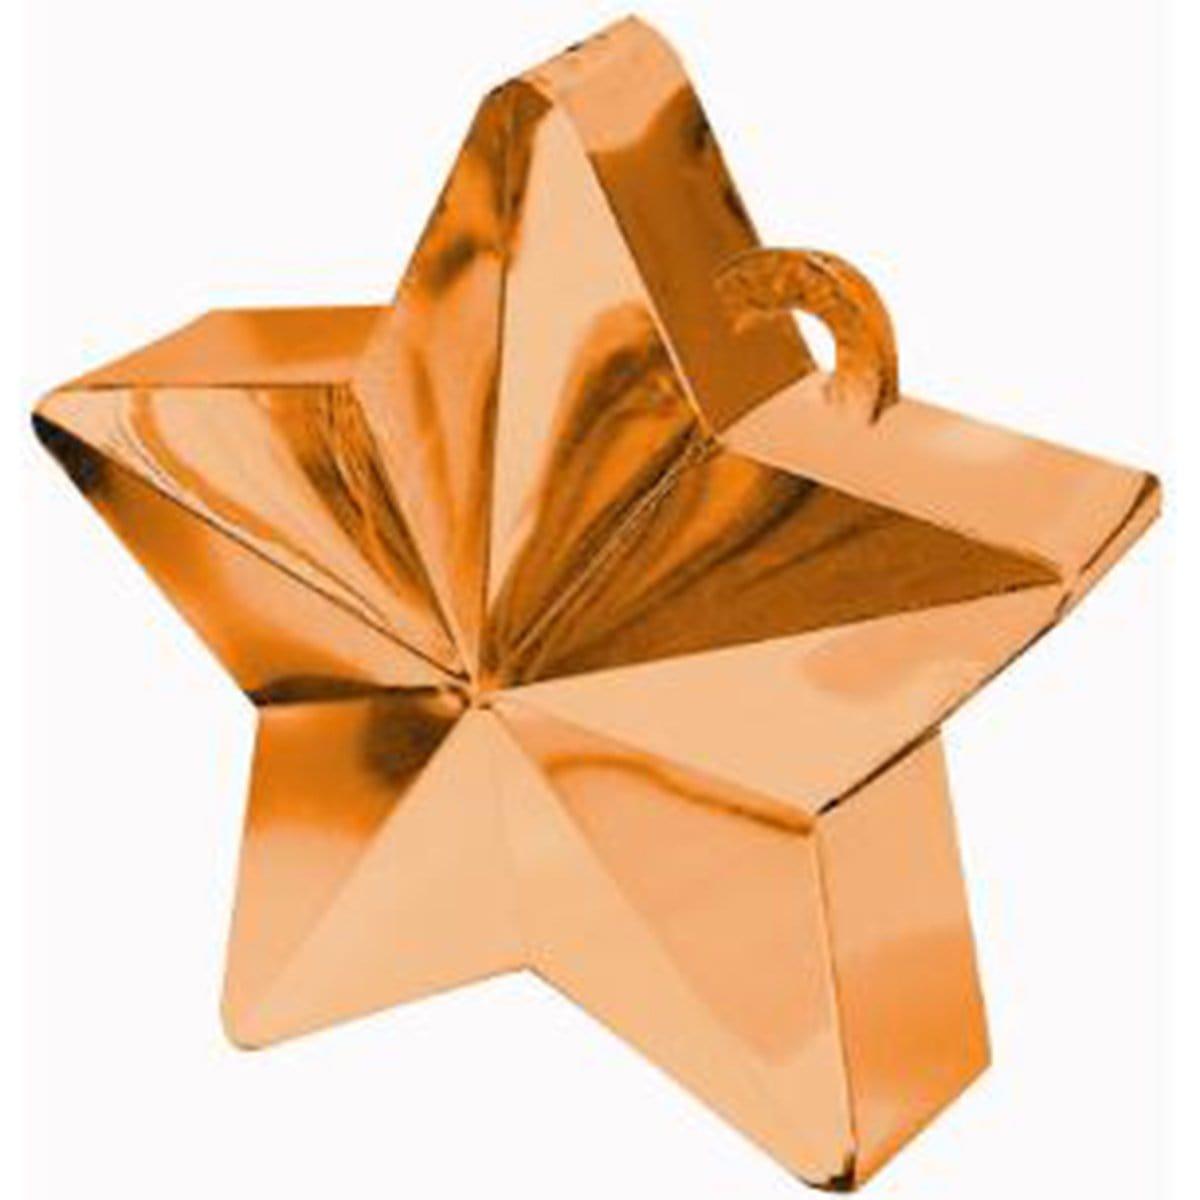 Buy Balloons Orange Star Balloon Weight sold at Party Expert